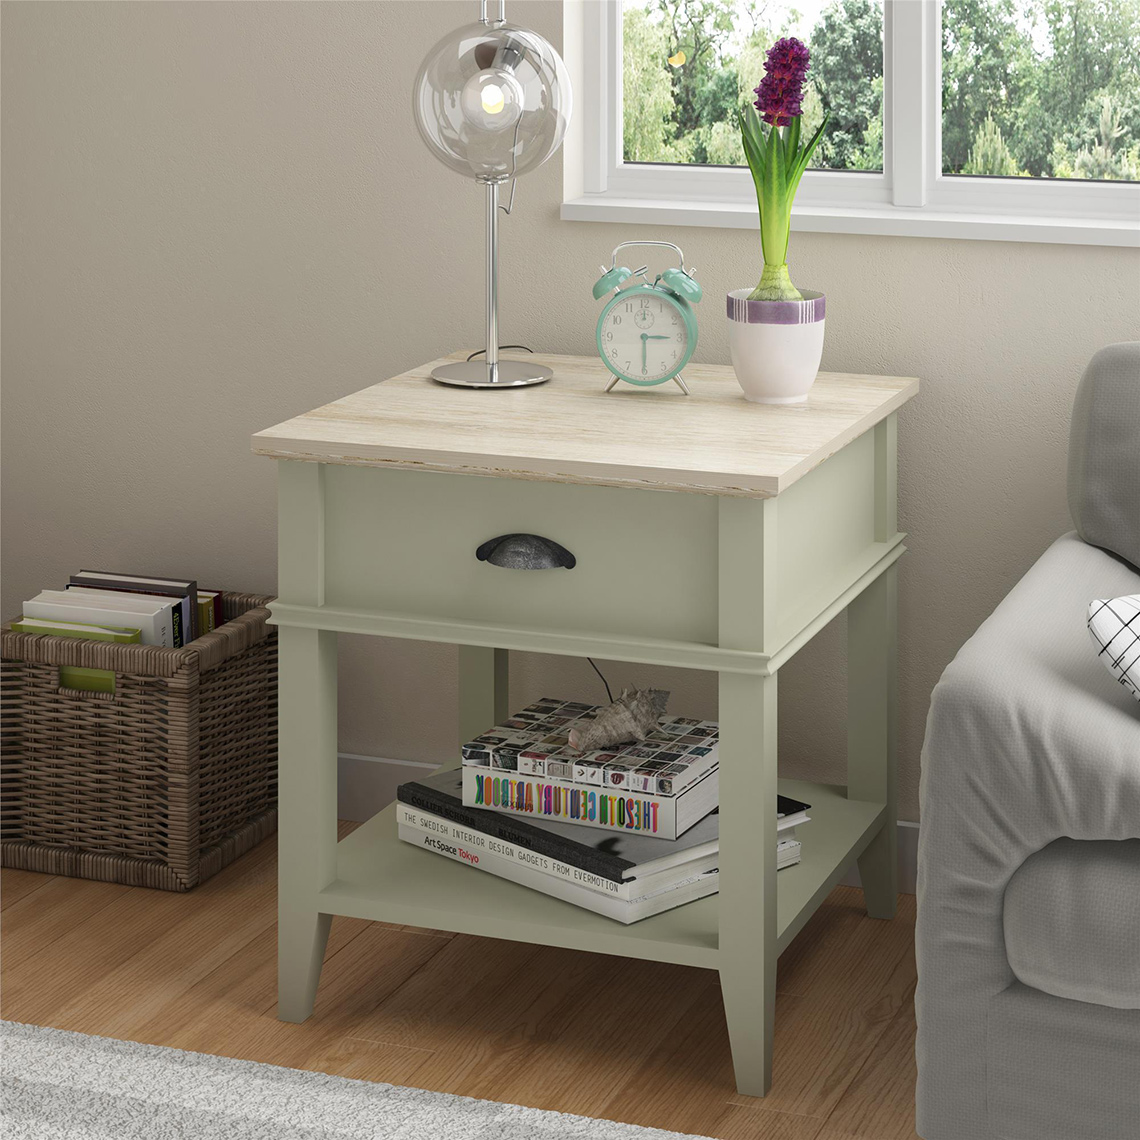 bedrooms archives multiyork furniture joinery sage green accent tables archive for kmart desk lamp clear end table acrylic coffee bunnings timber outdoor cement concrete and wood